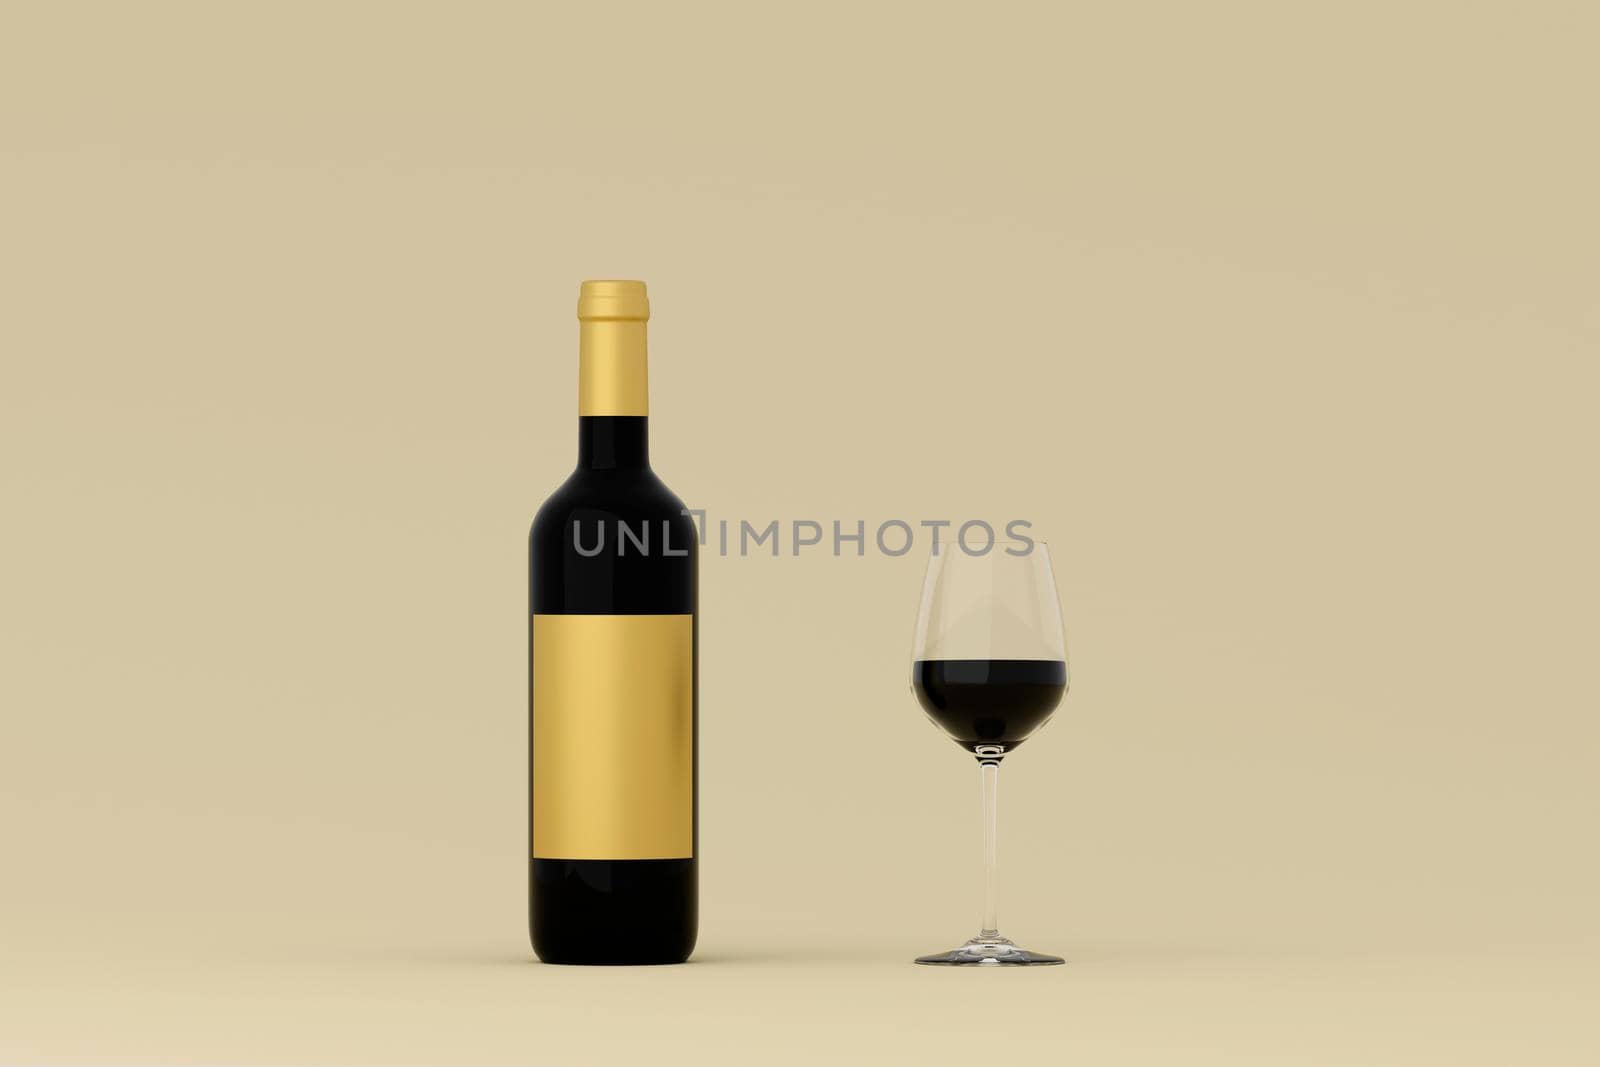 A bottle and glass of red wine on a white background, 3D illustration by raferto1973